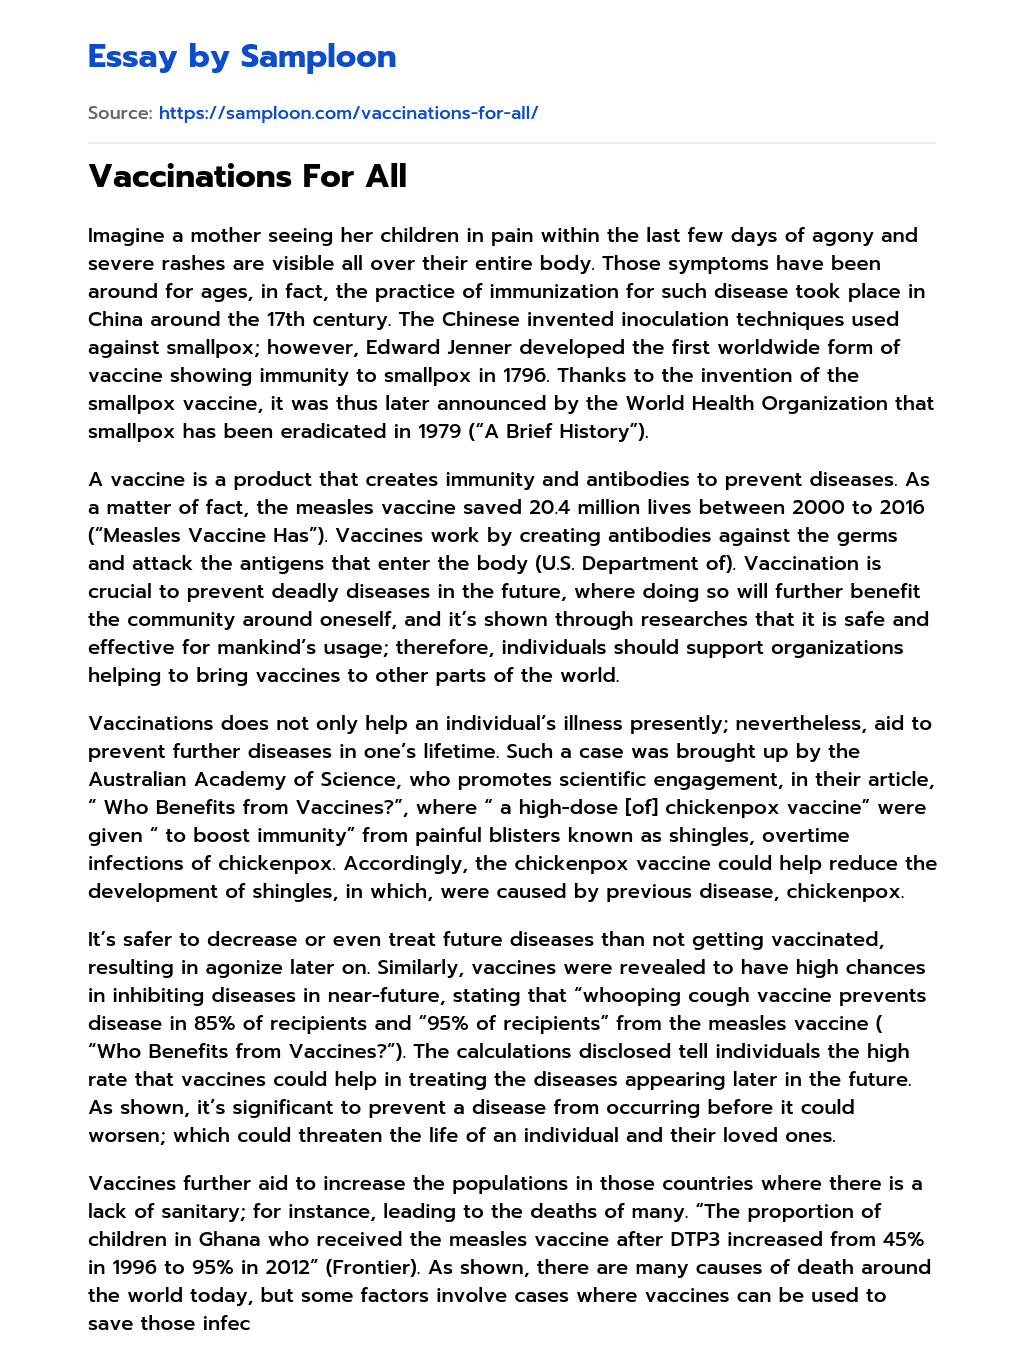 Vaccinations For All essay